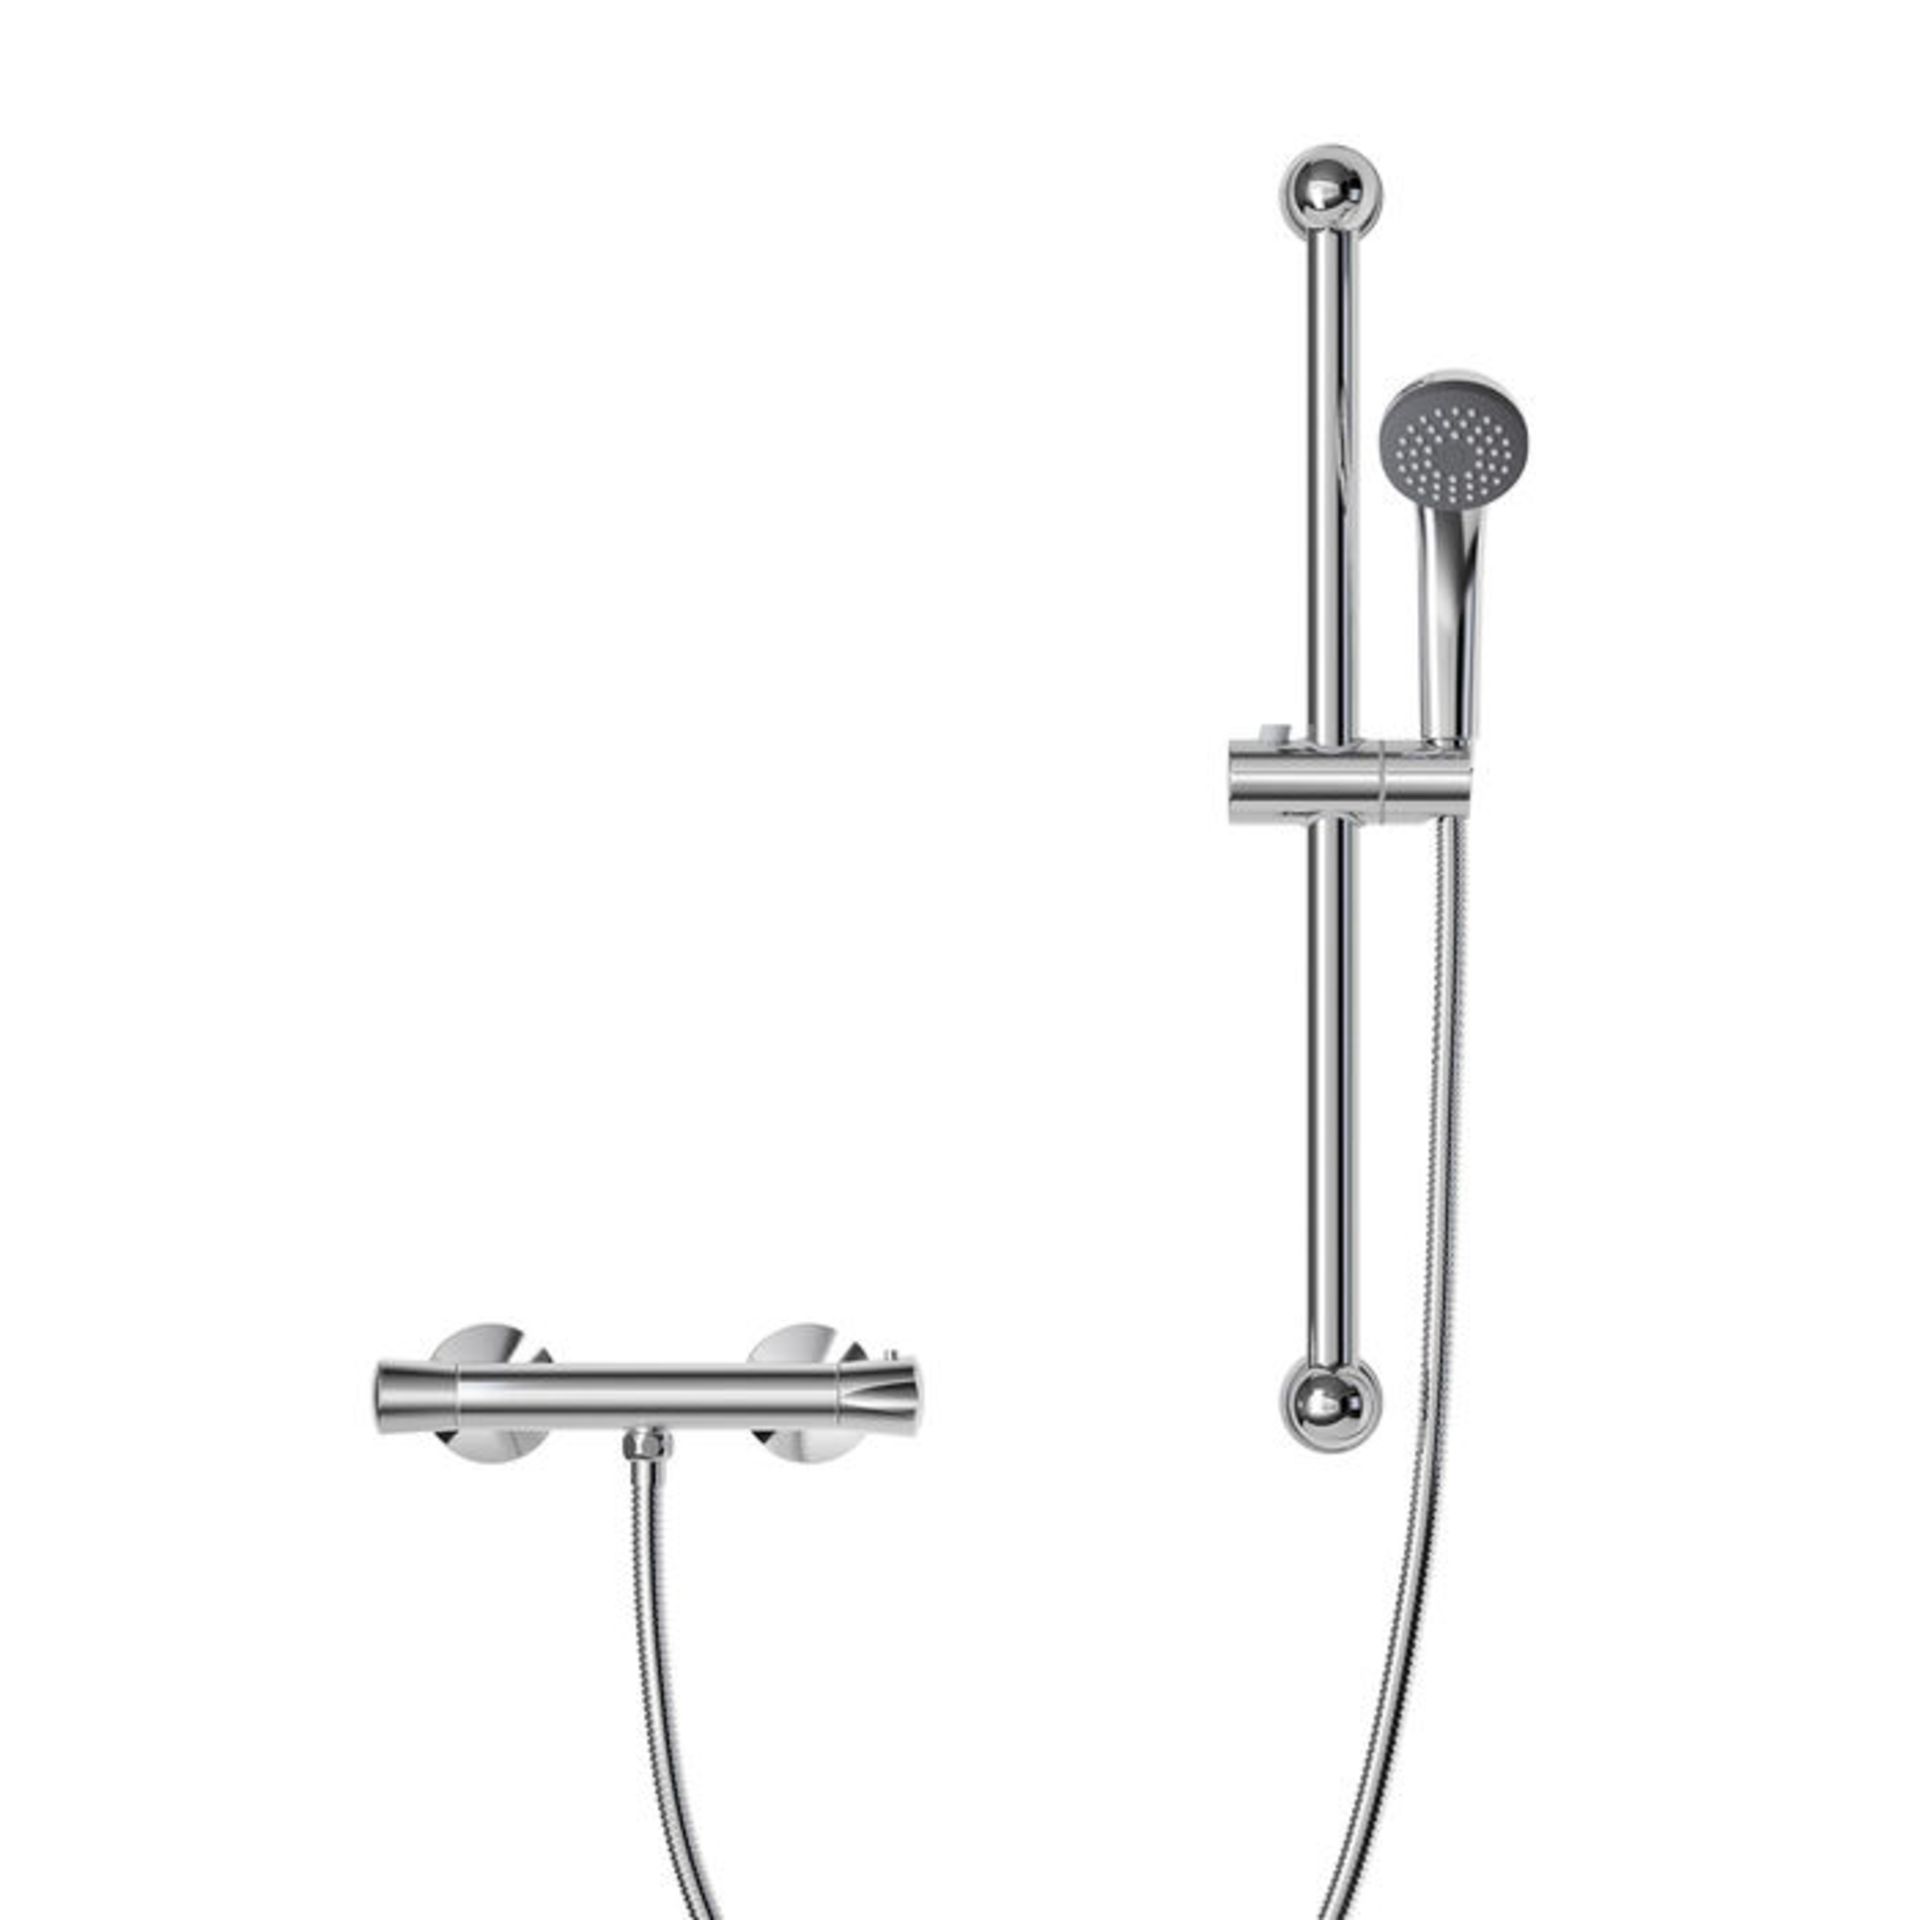 (LX50) Round Bar Mixer Kit. Thermostatic benefits allows complete control over the temperature and - Image 2 of 2